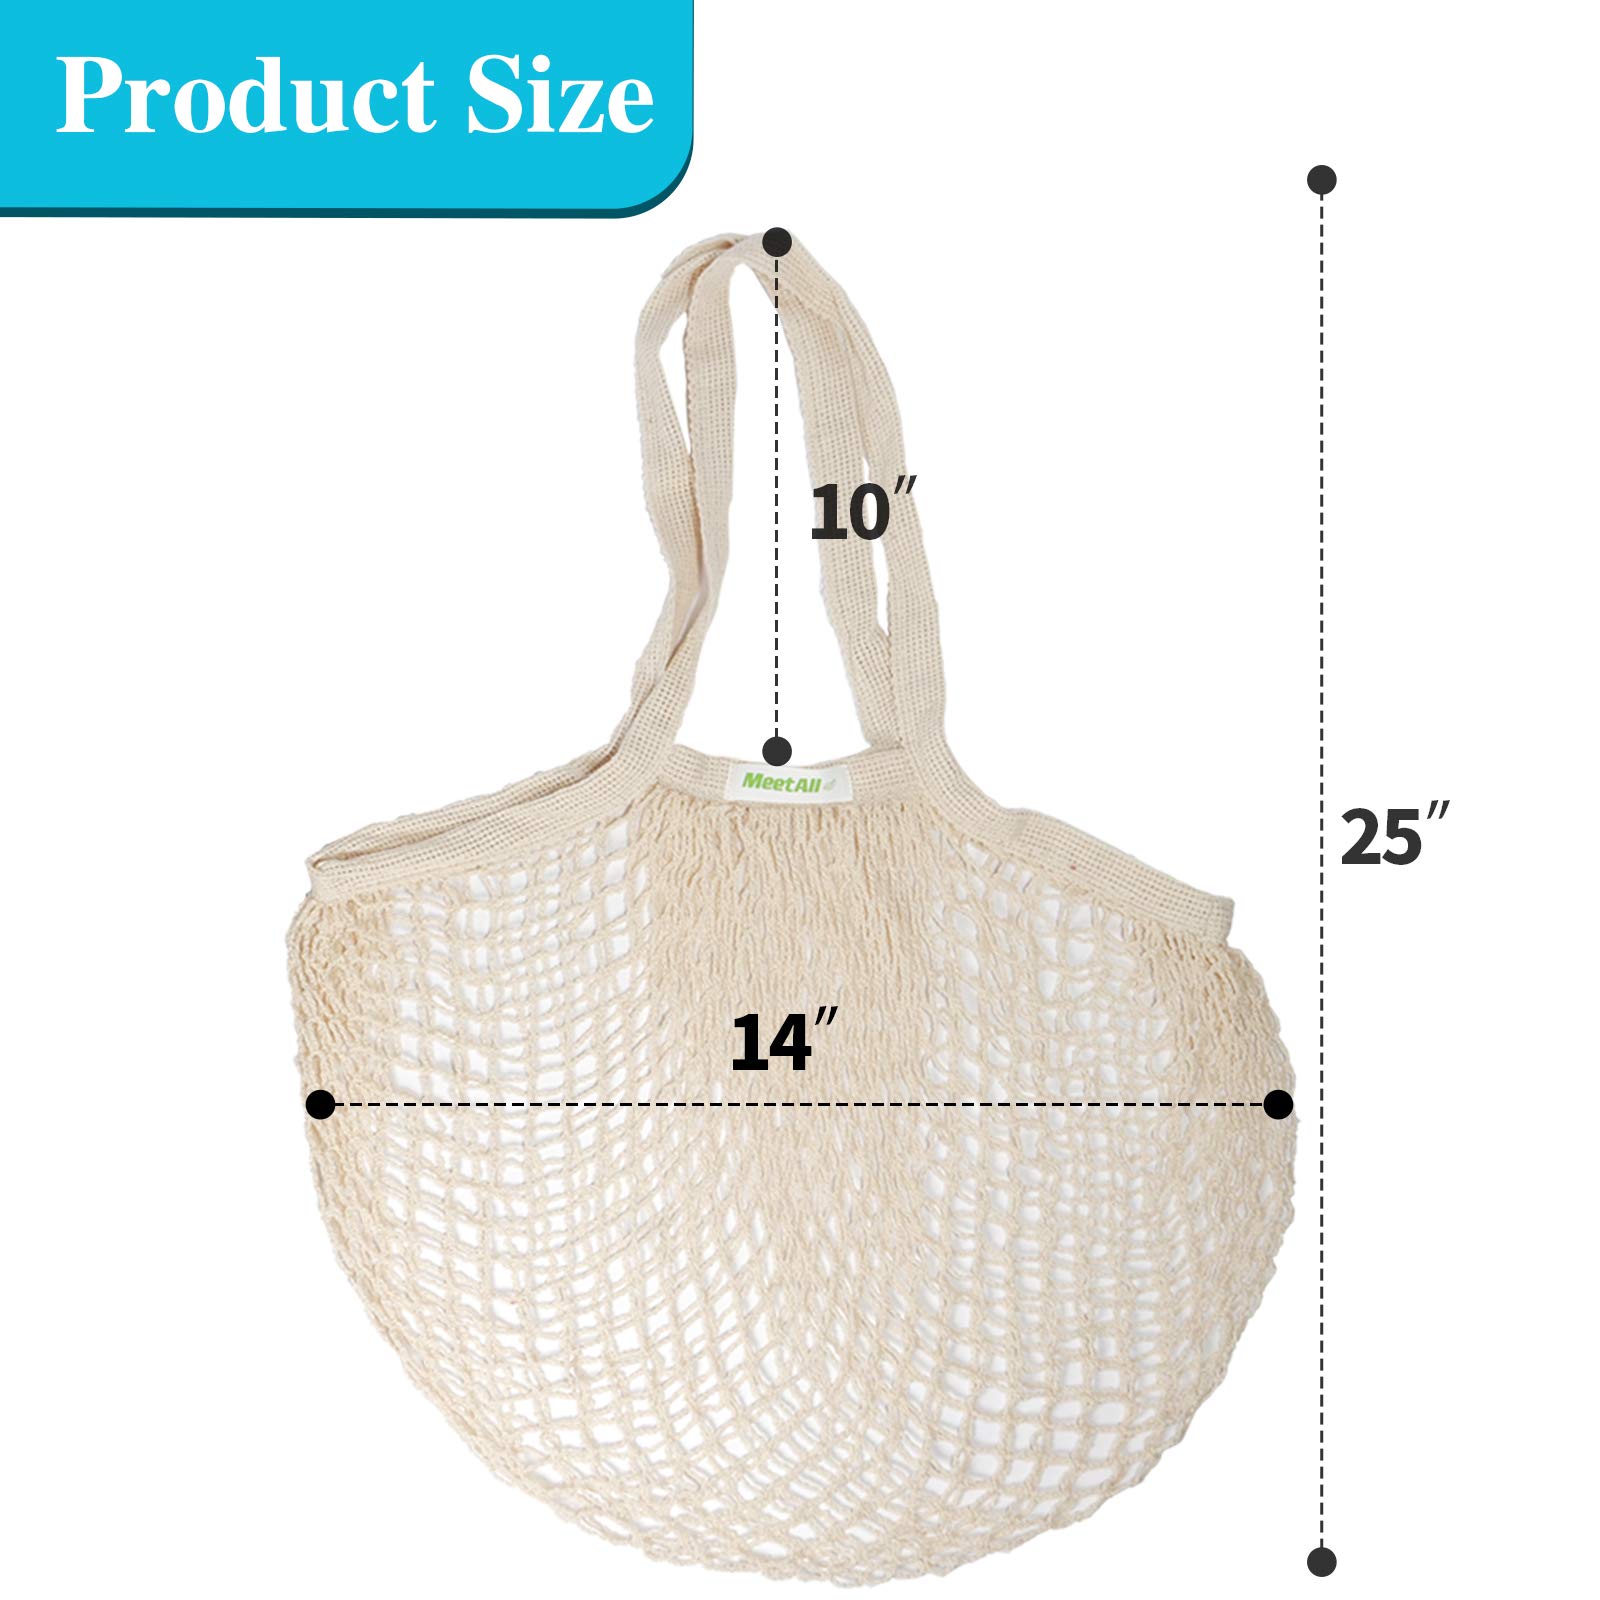 meetall Mesh Grocery Bags, Reusable Tote Bags with Sturdy Handle, Washable, Eco Friendly, Cotton String Net, for Shopping and Storage Fruit Vegetable (5 Pack, One Size, Off White/Pink/Blue/Red/Black)